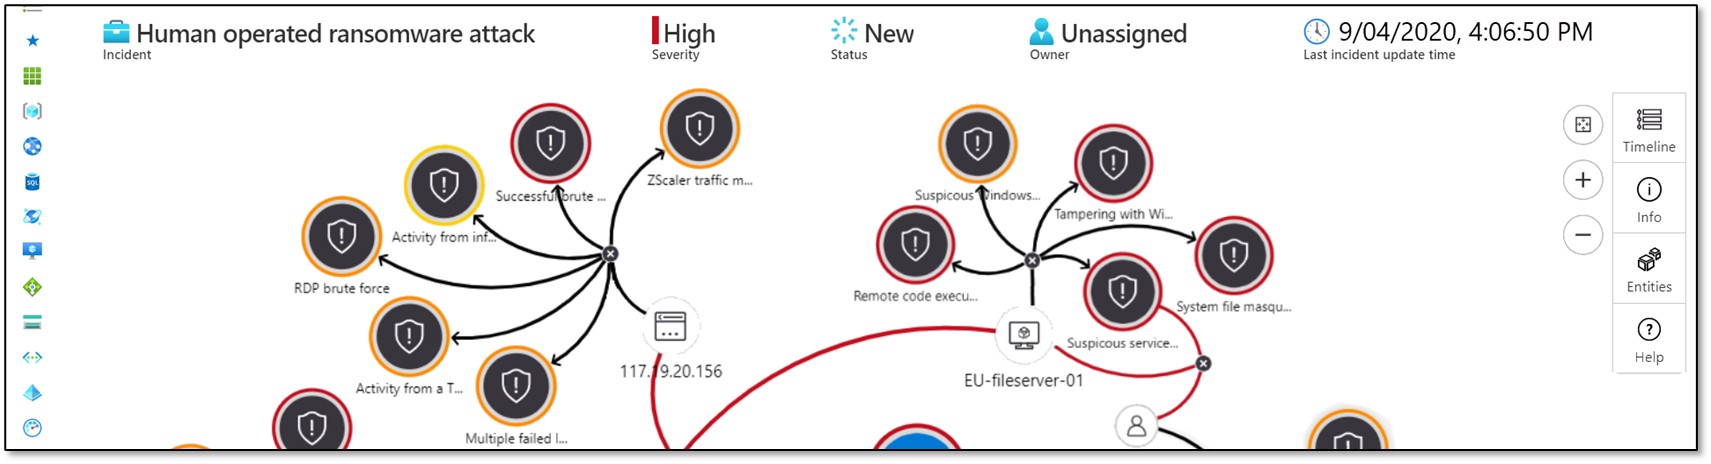 Microsoft Defender for Endpoint Threat Map 